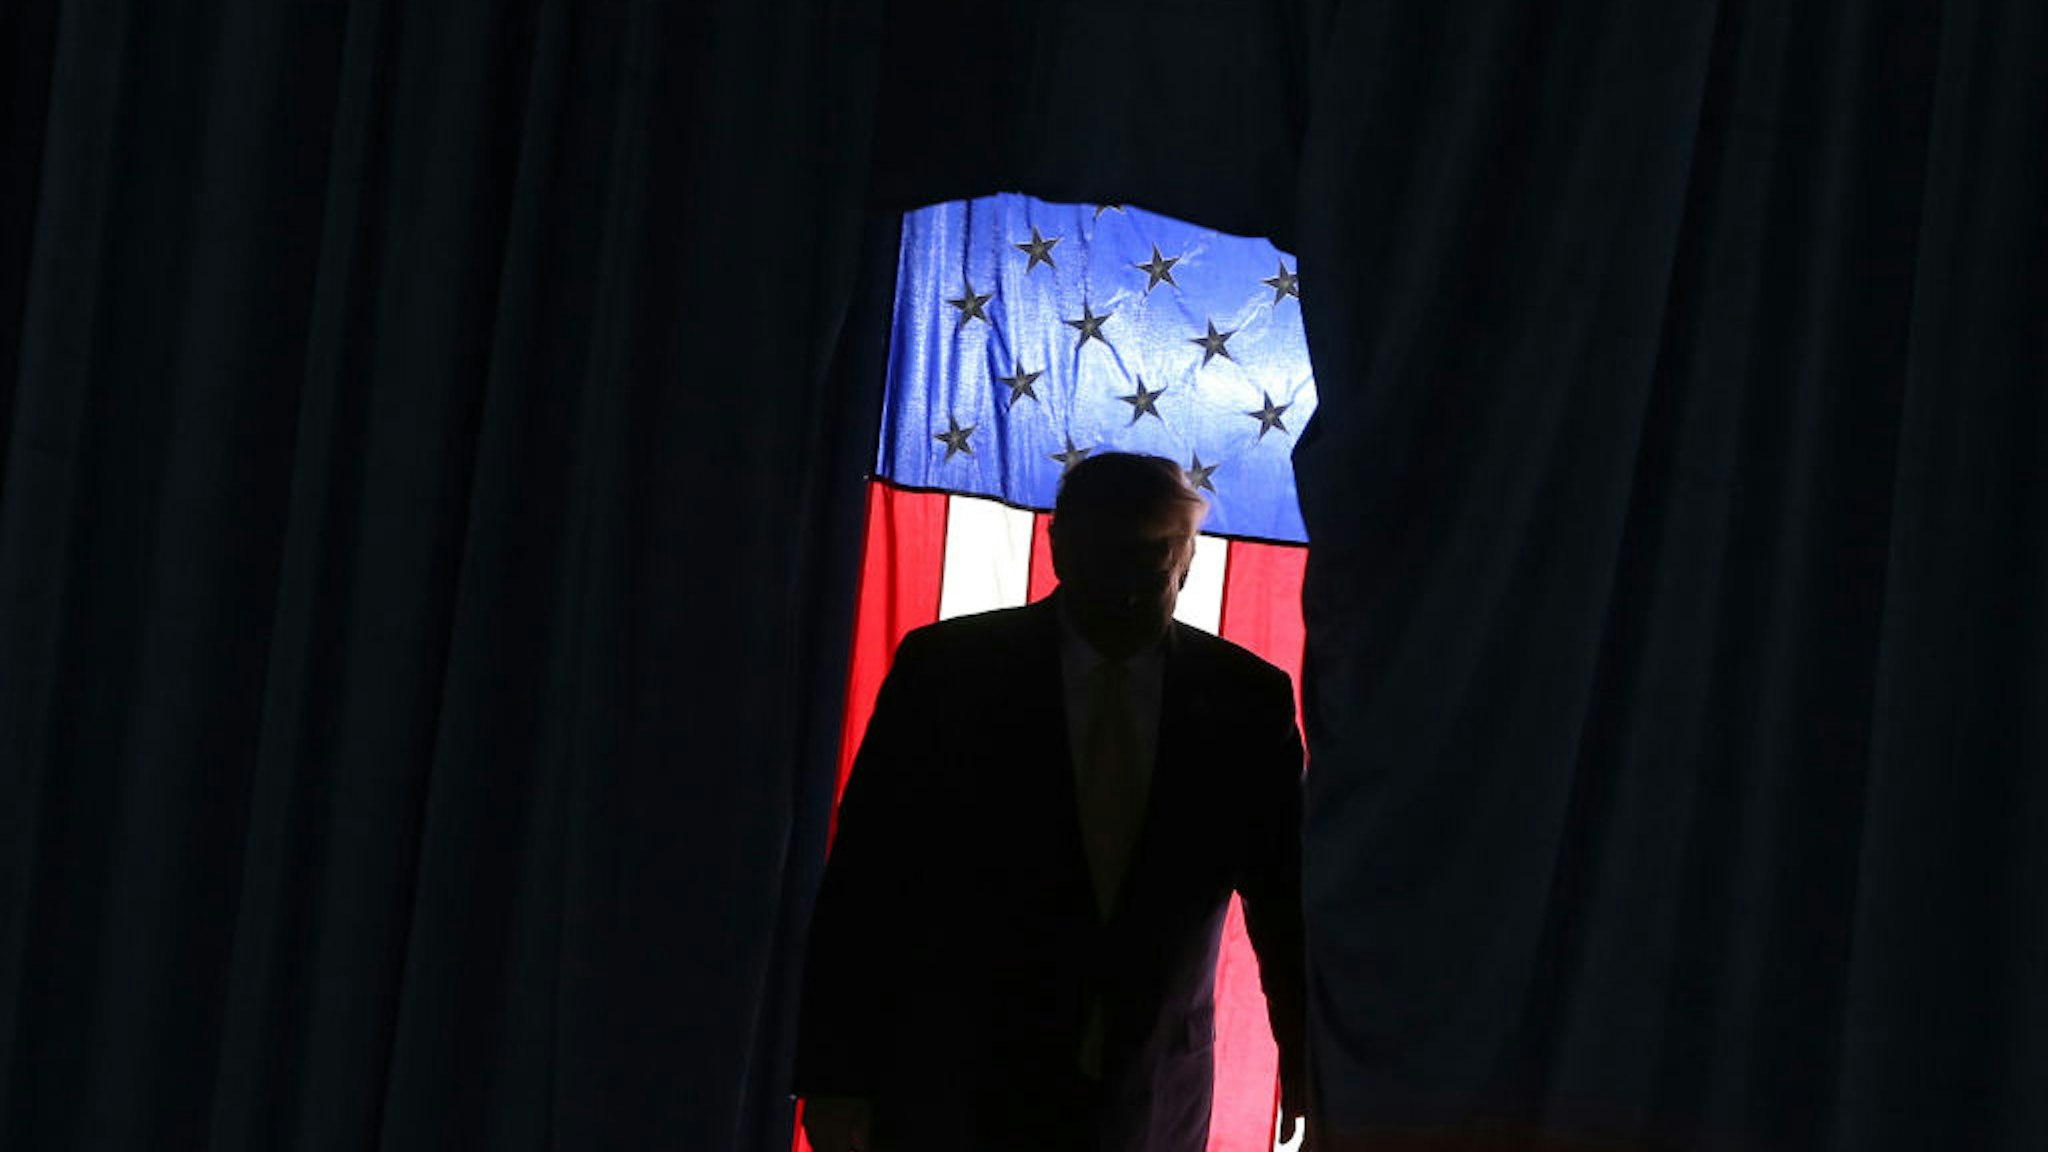 U.S. President Donald Trump walks onto stage during a campaign rally at Sudduth Coliseum on October 11, 2019 in Lake Charles, Louisiana.